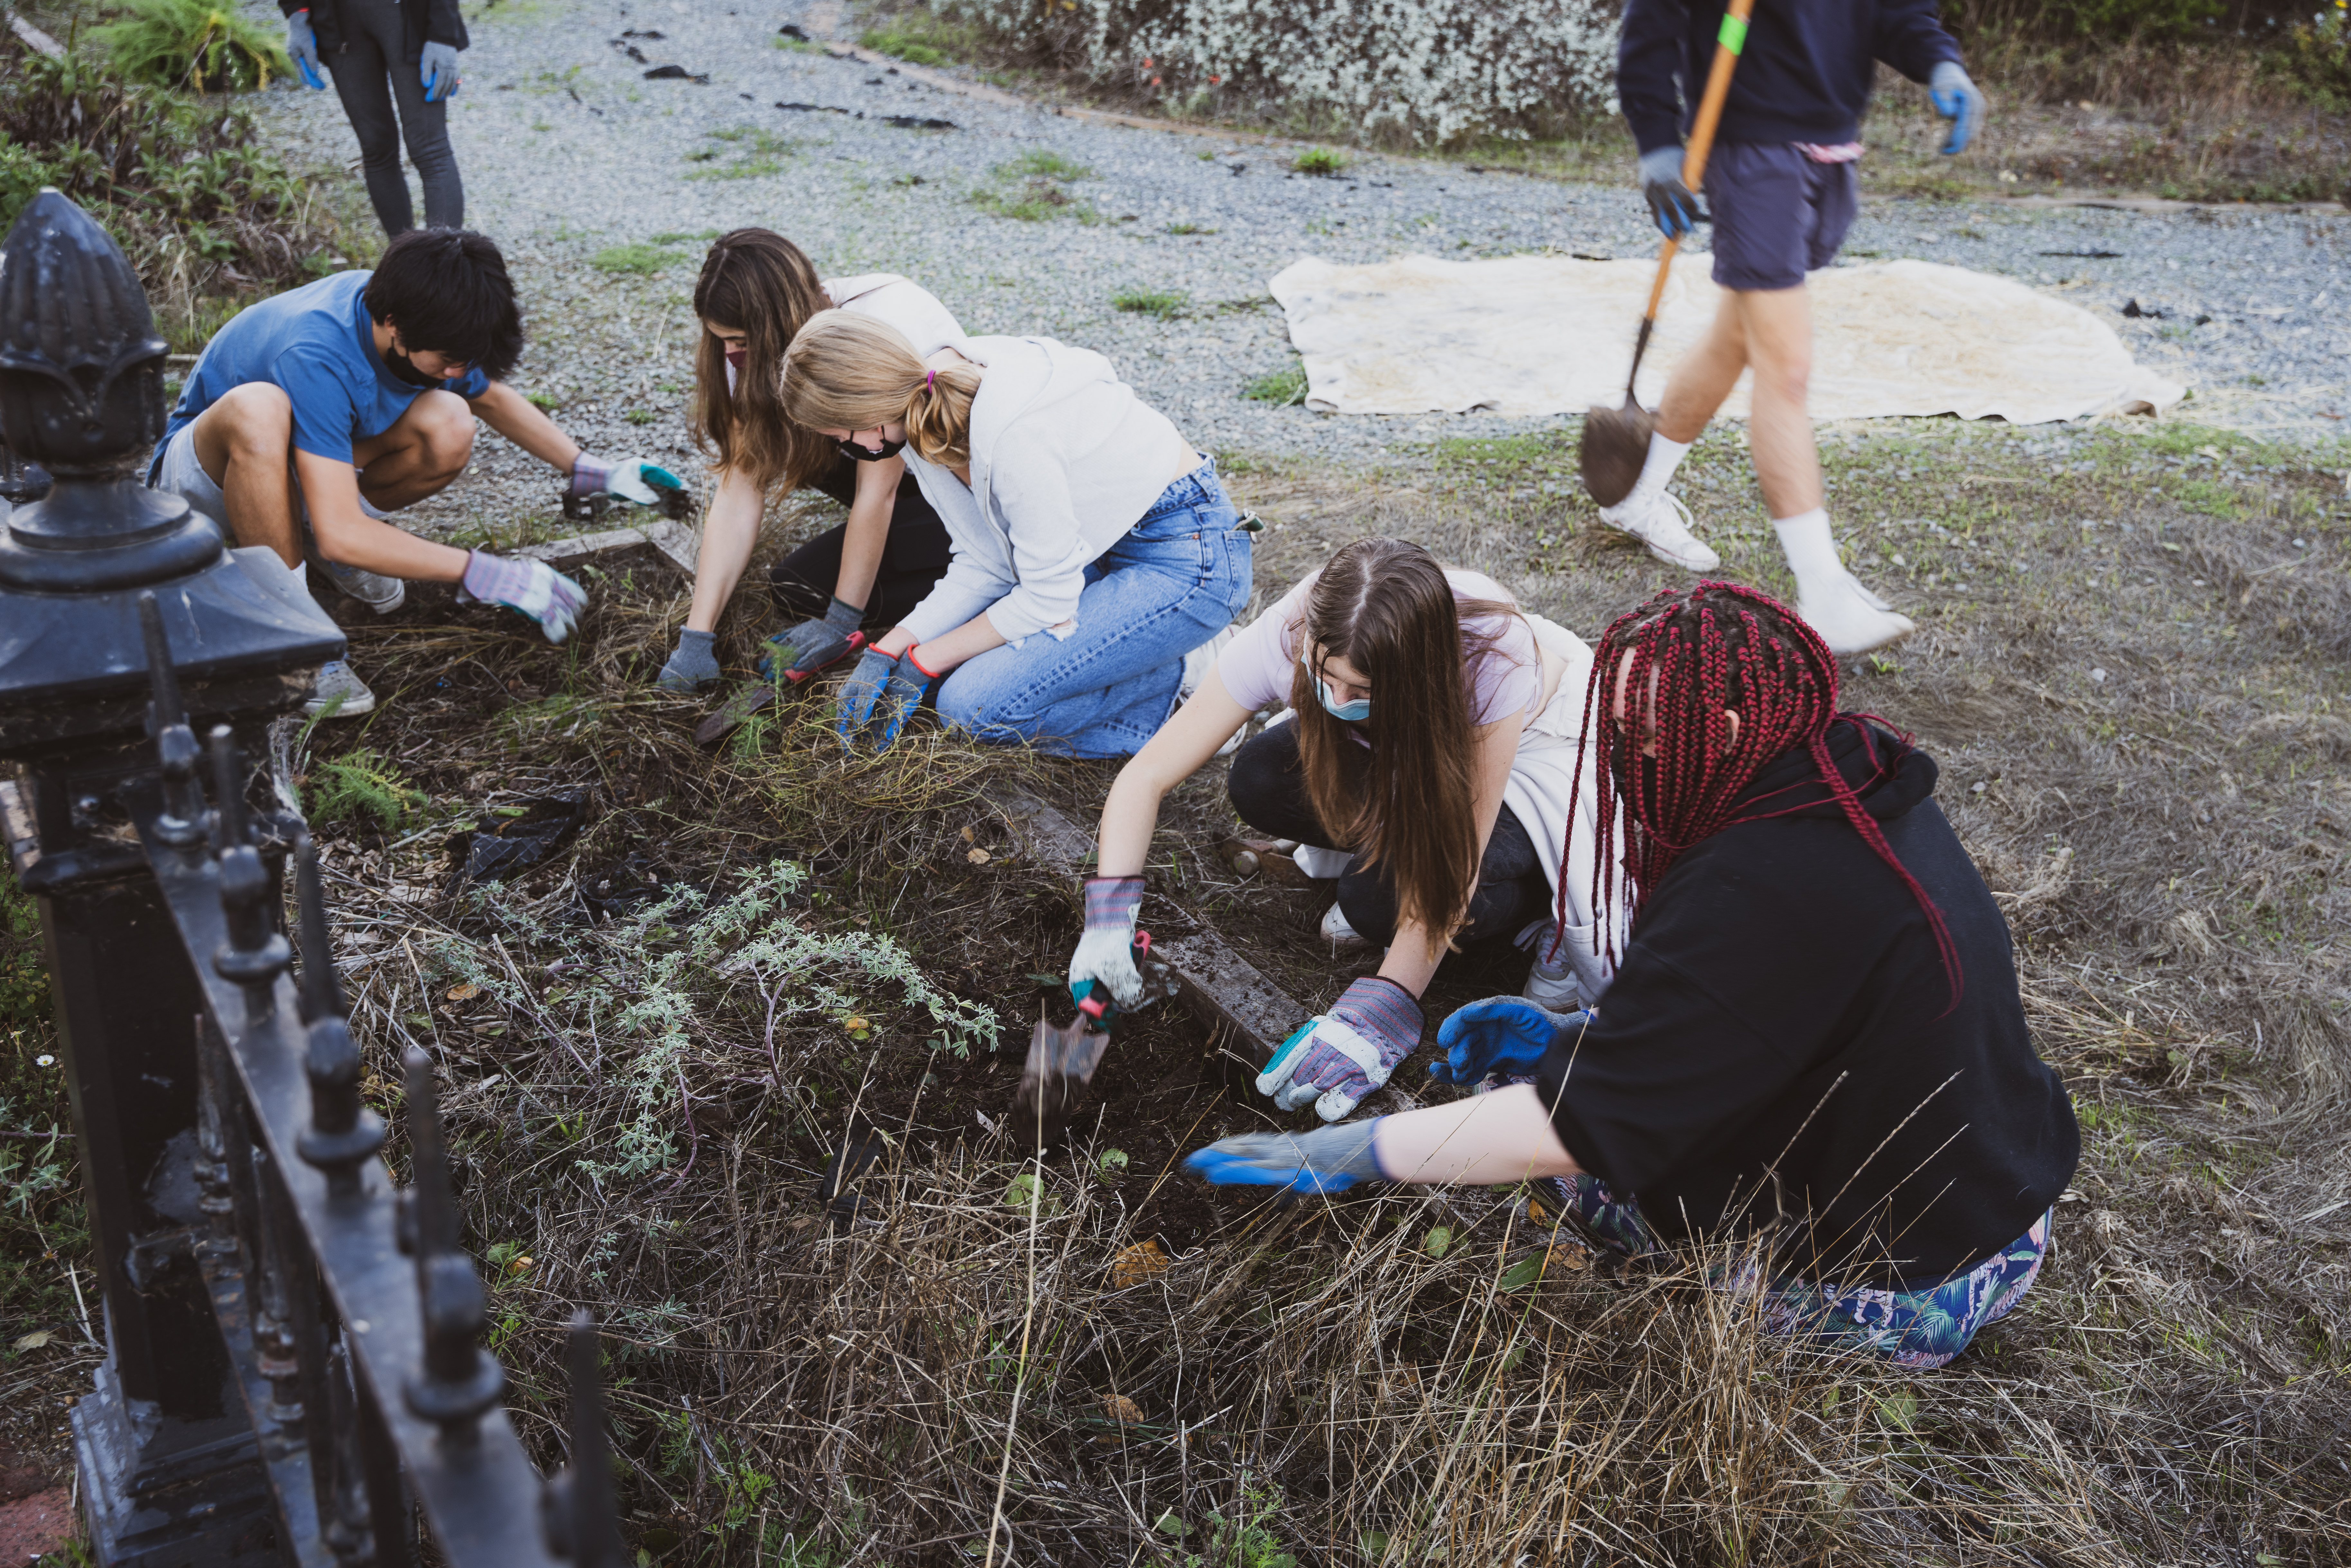 Youth Leaders planting young seedlings in the ground at the Center.